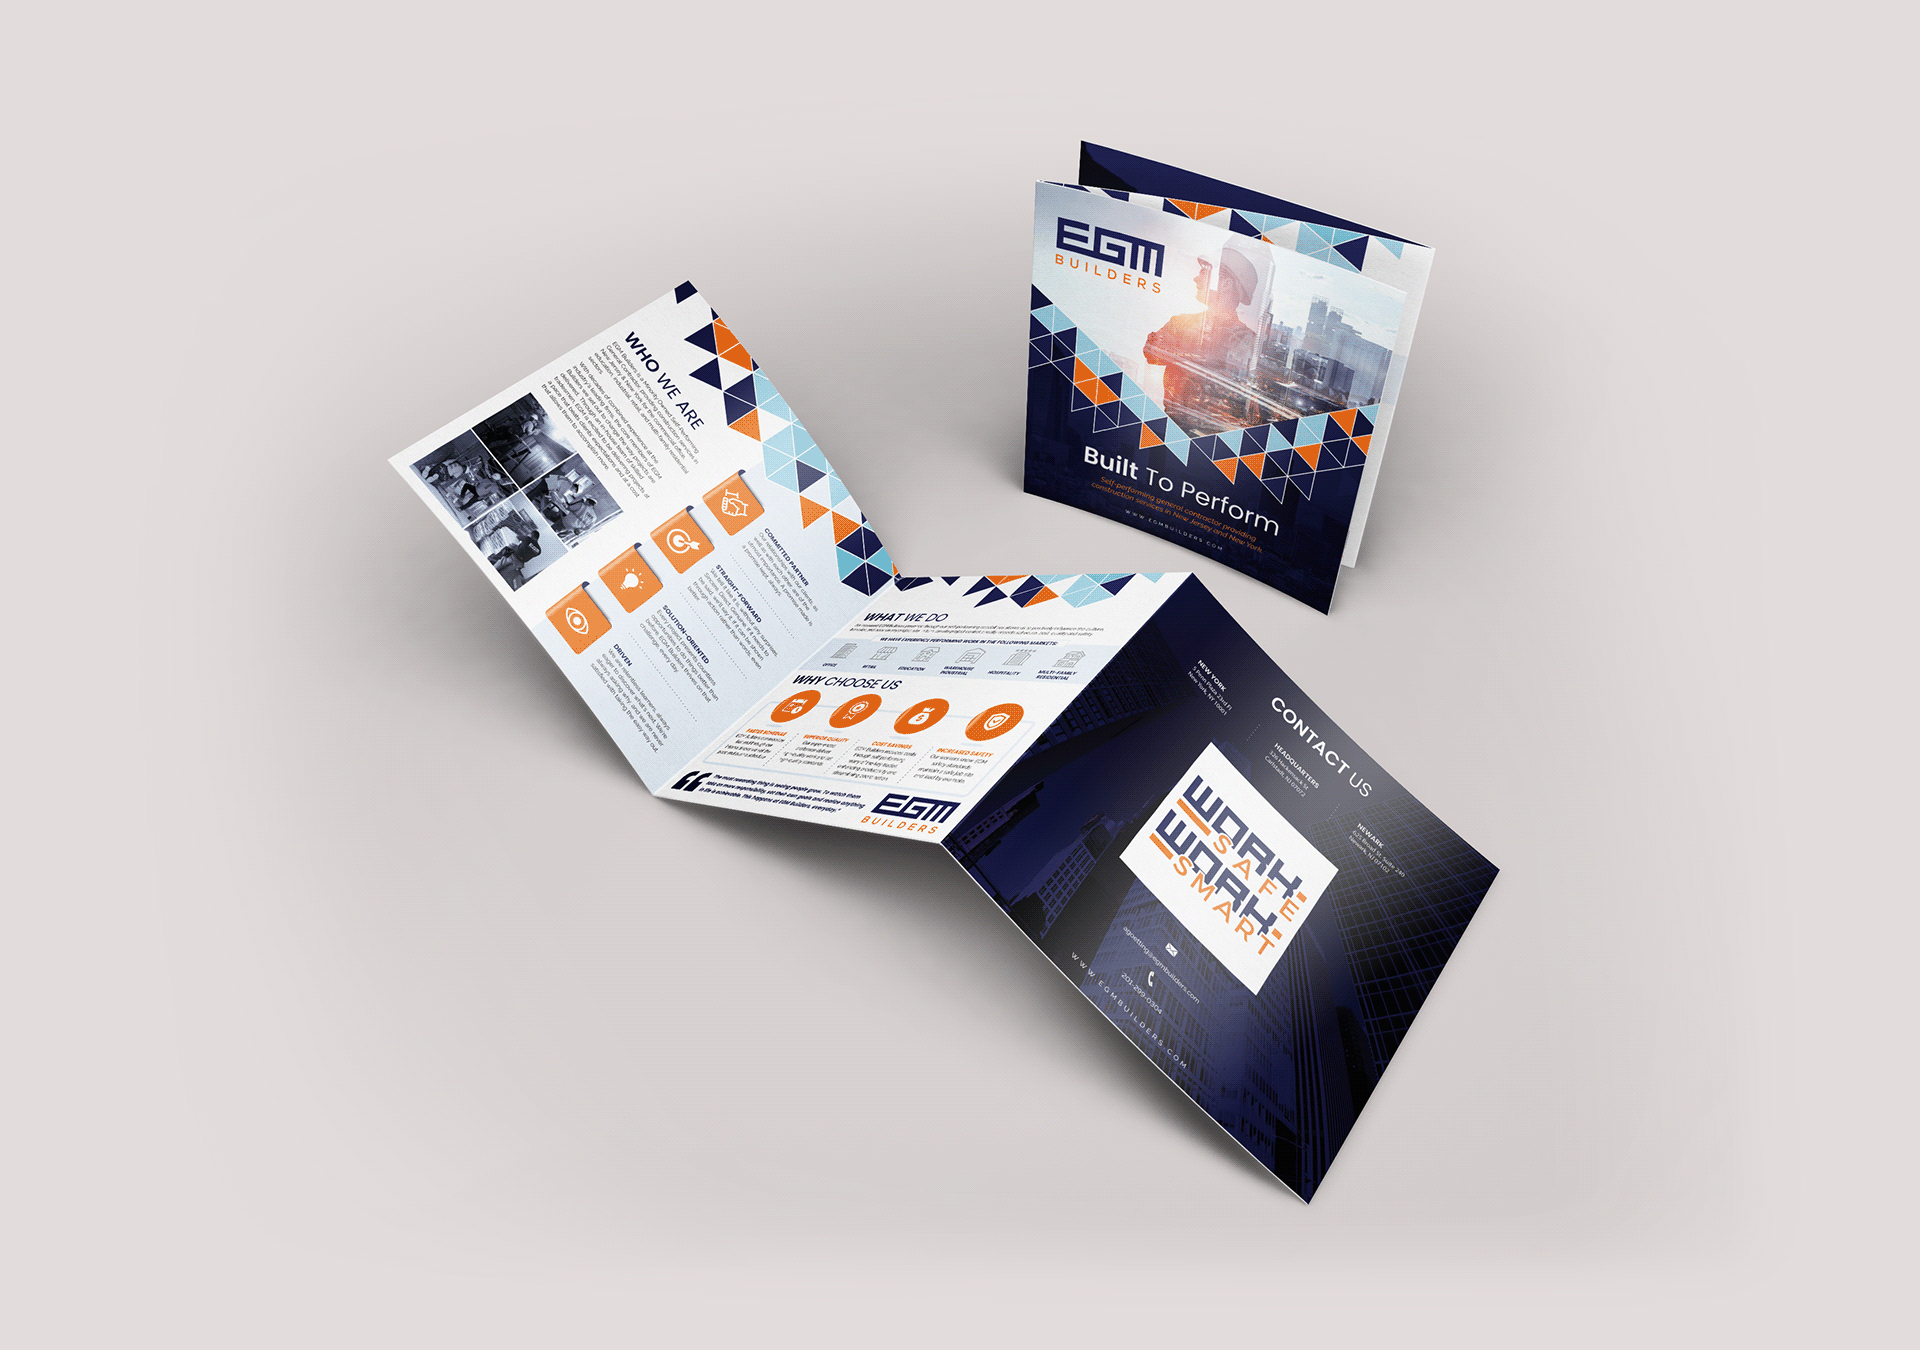 Square Trifold Brochure Design for Construction Company by Elivera Designs